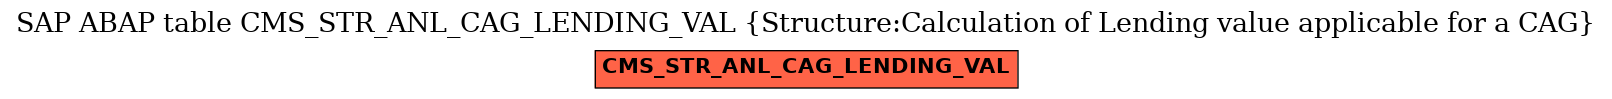 E-R Diagram for table CMS_STR_ANL_CAG_LENDING_VAL (Structure:Calculation of Lending value applicable for a CAG)